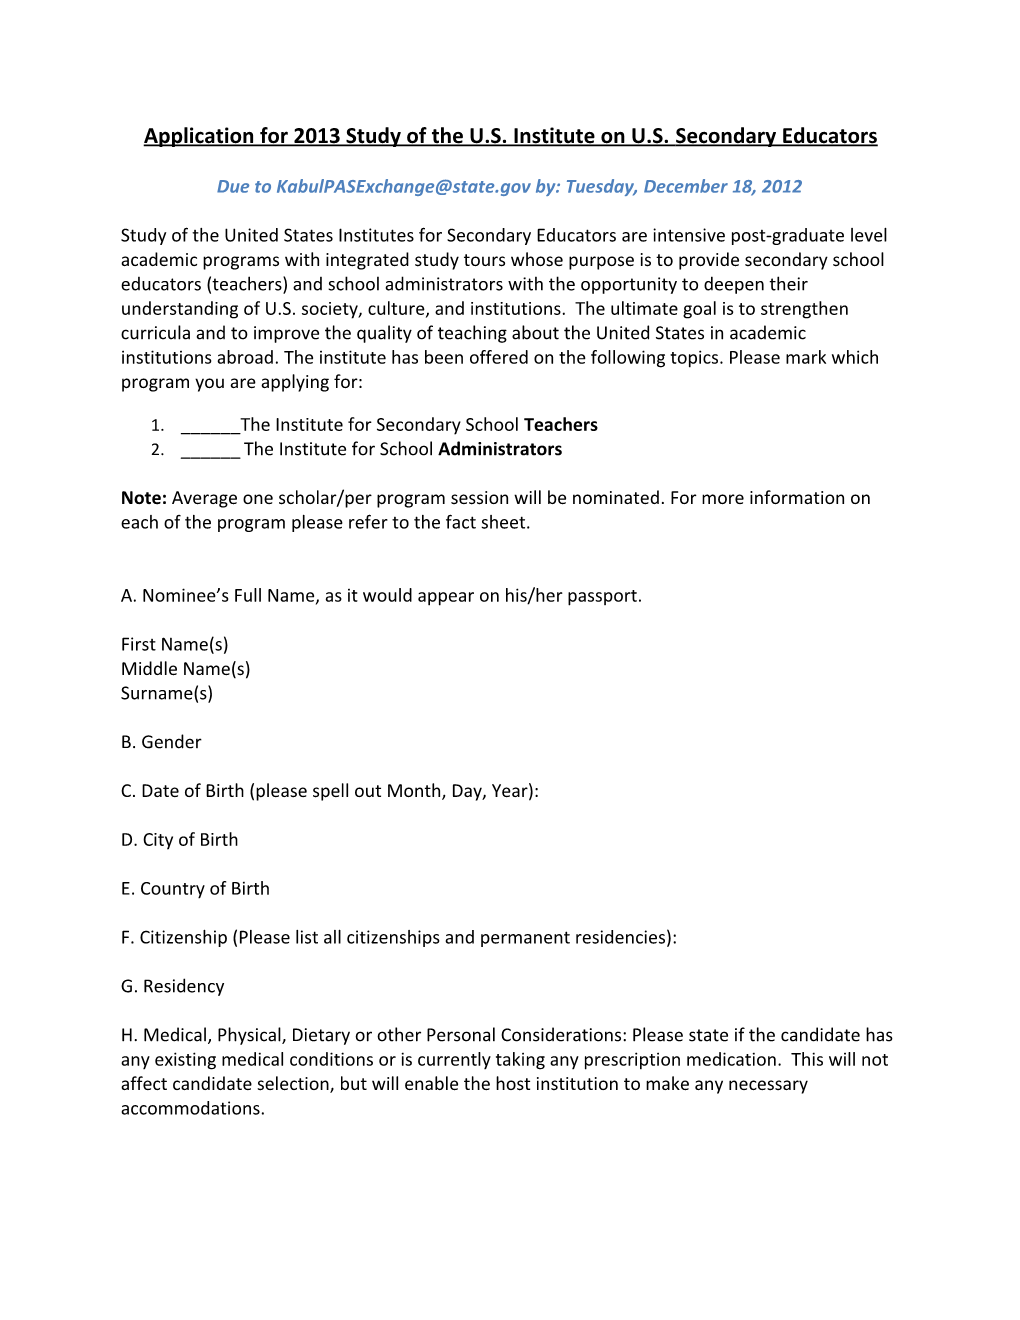 Application for 2013Study of the U.S. Institute on U.S. Secondary Educators